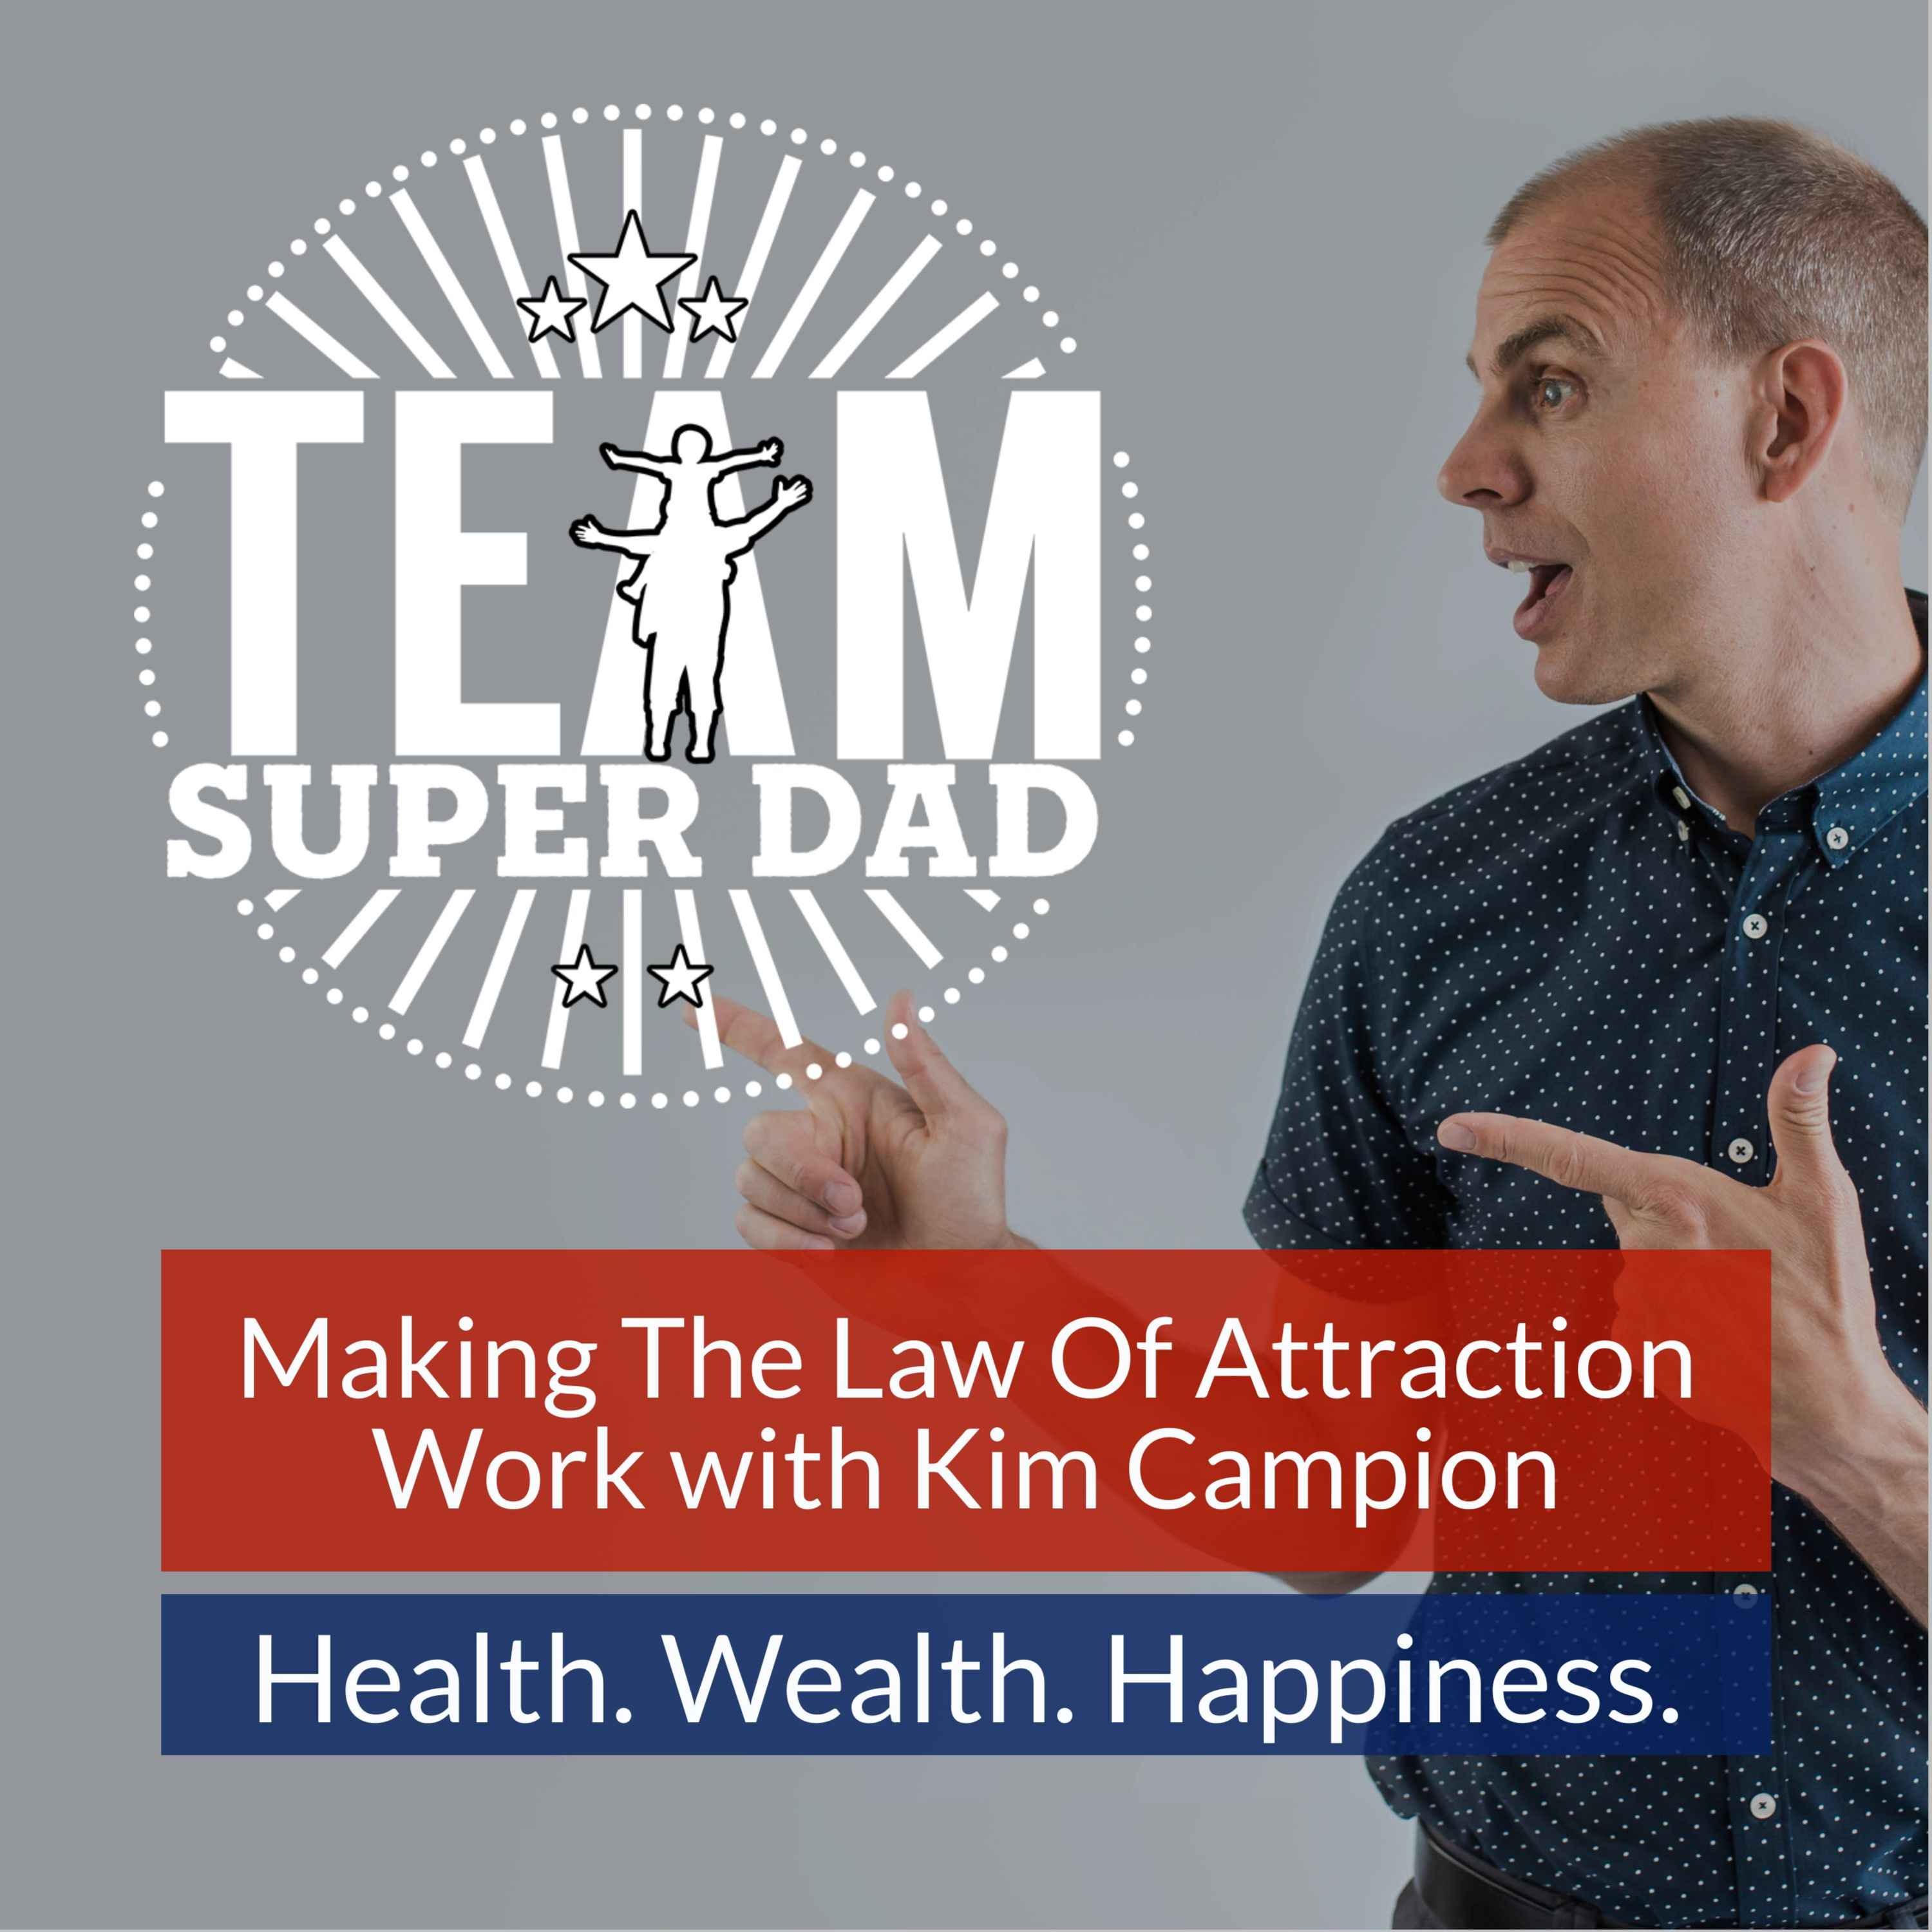 Making The Law Of Attraction Work with Kim Campion